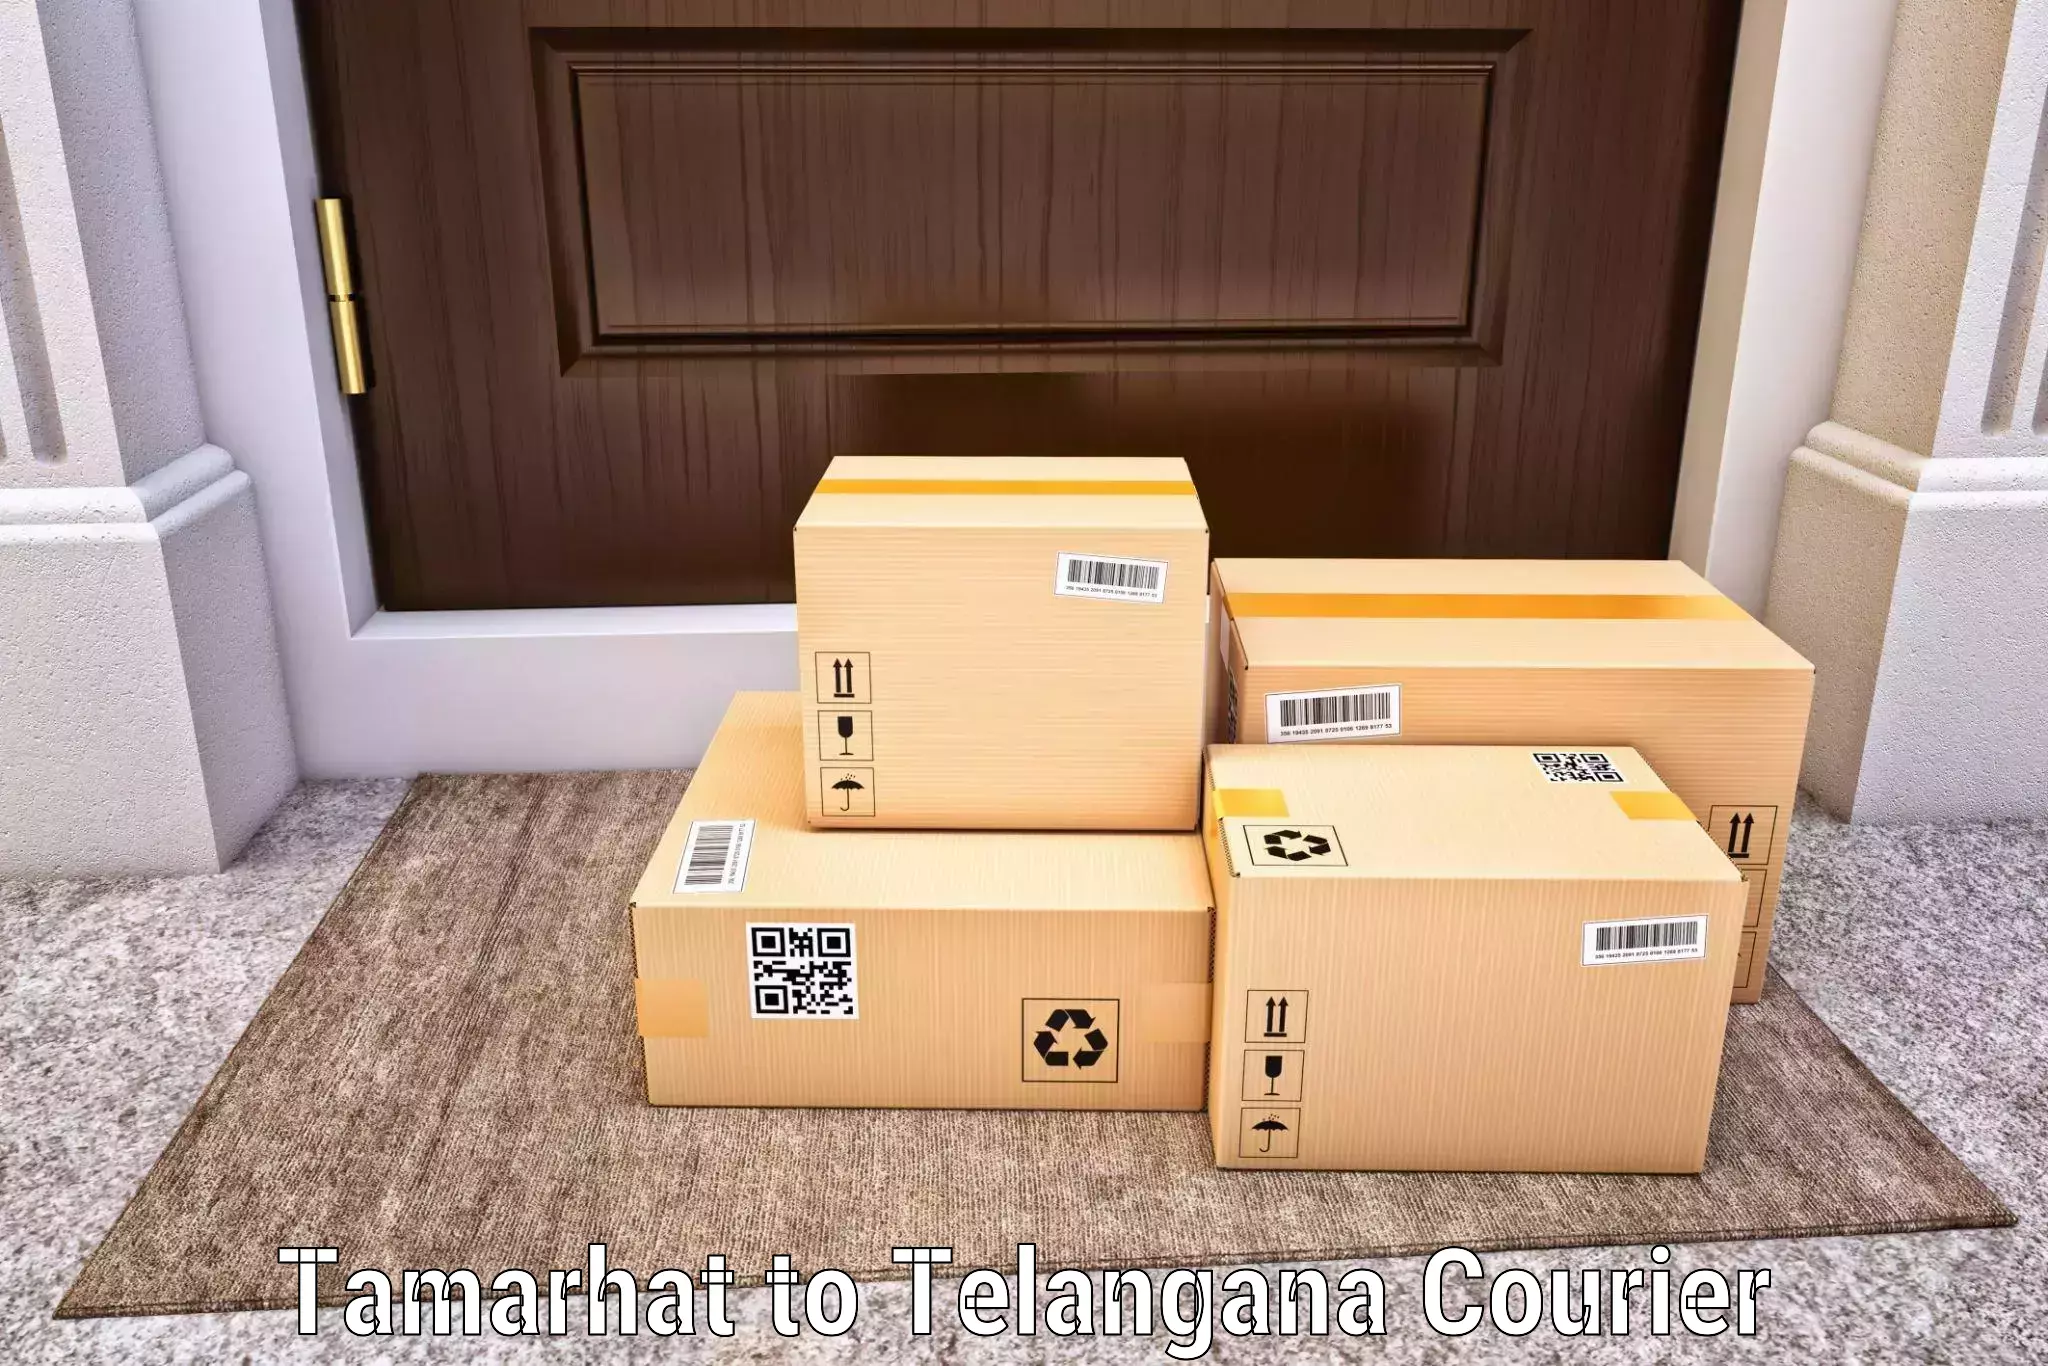 User-friendly delivery service Tamarhat to Jangaon